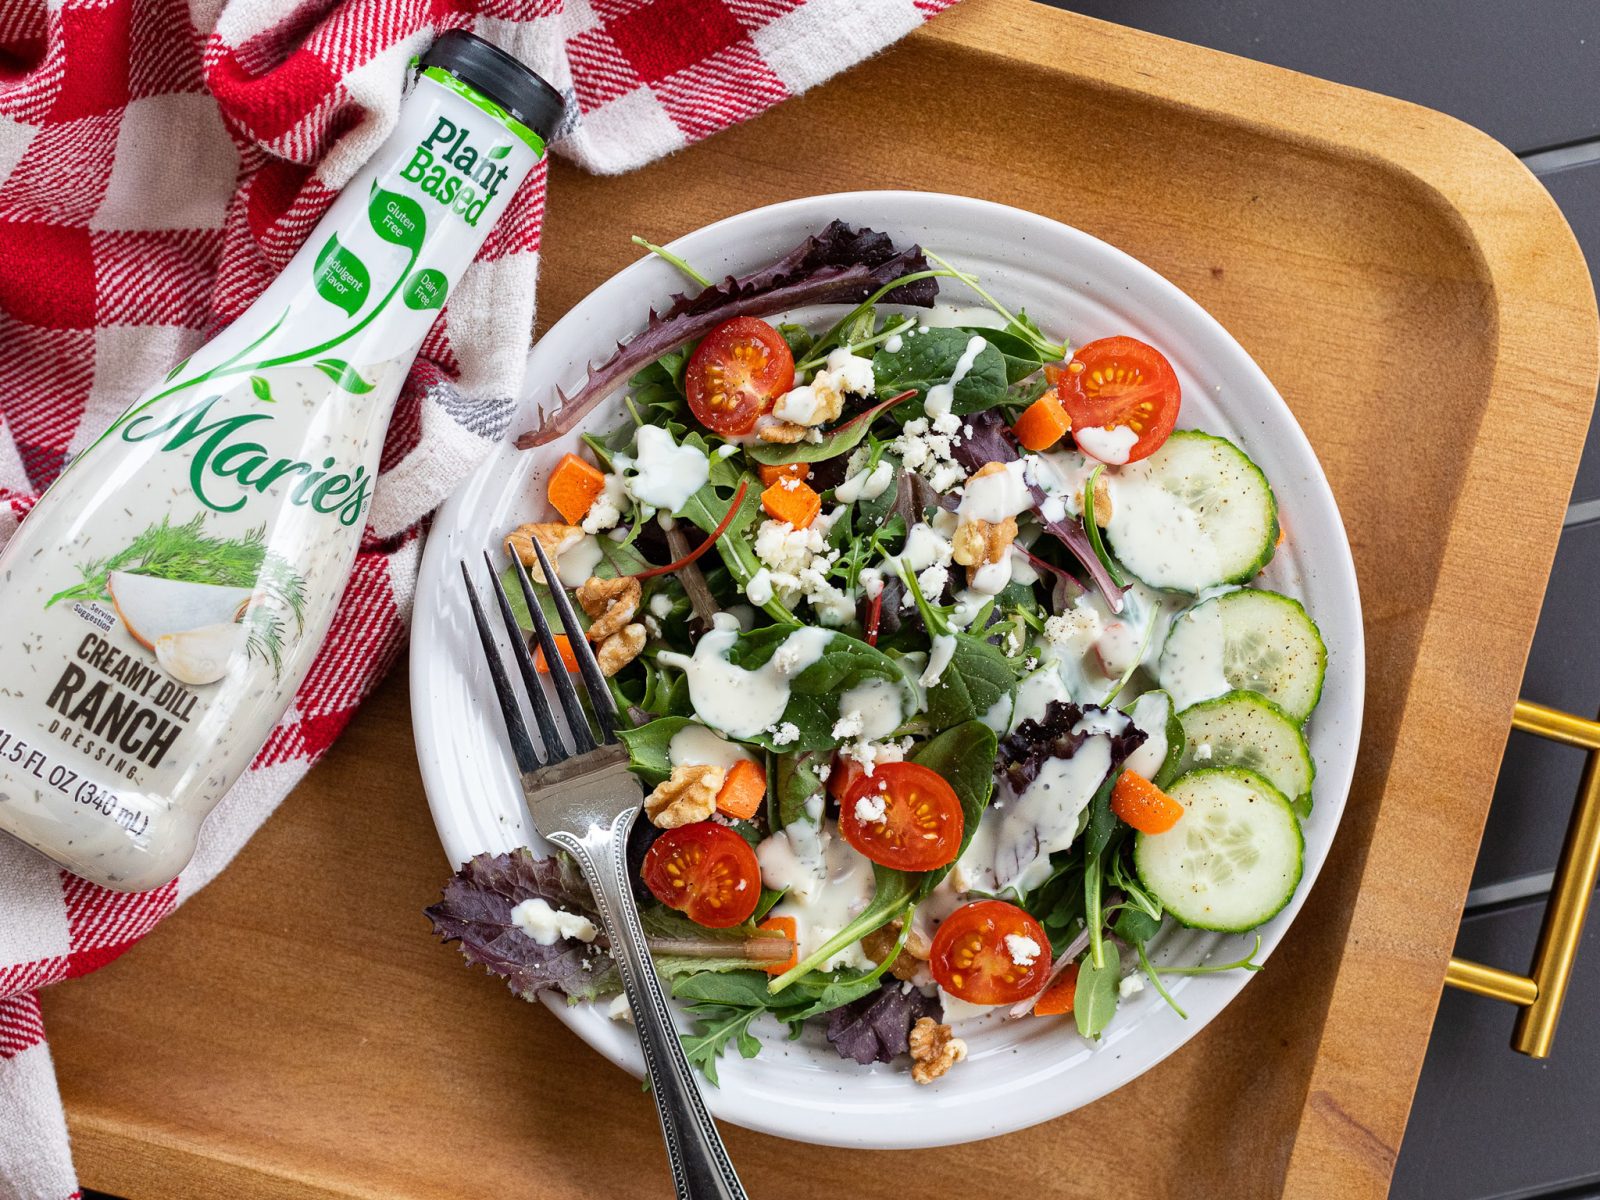 Grab Marie’s Plant-Based Dressing For As Low As $1.50 At Publix (Regular Price $4.69)